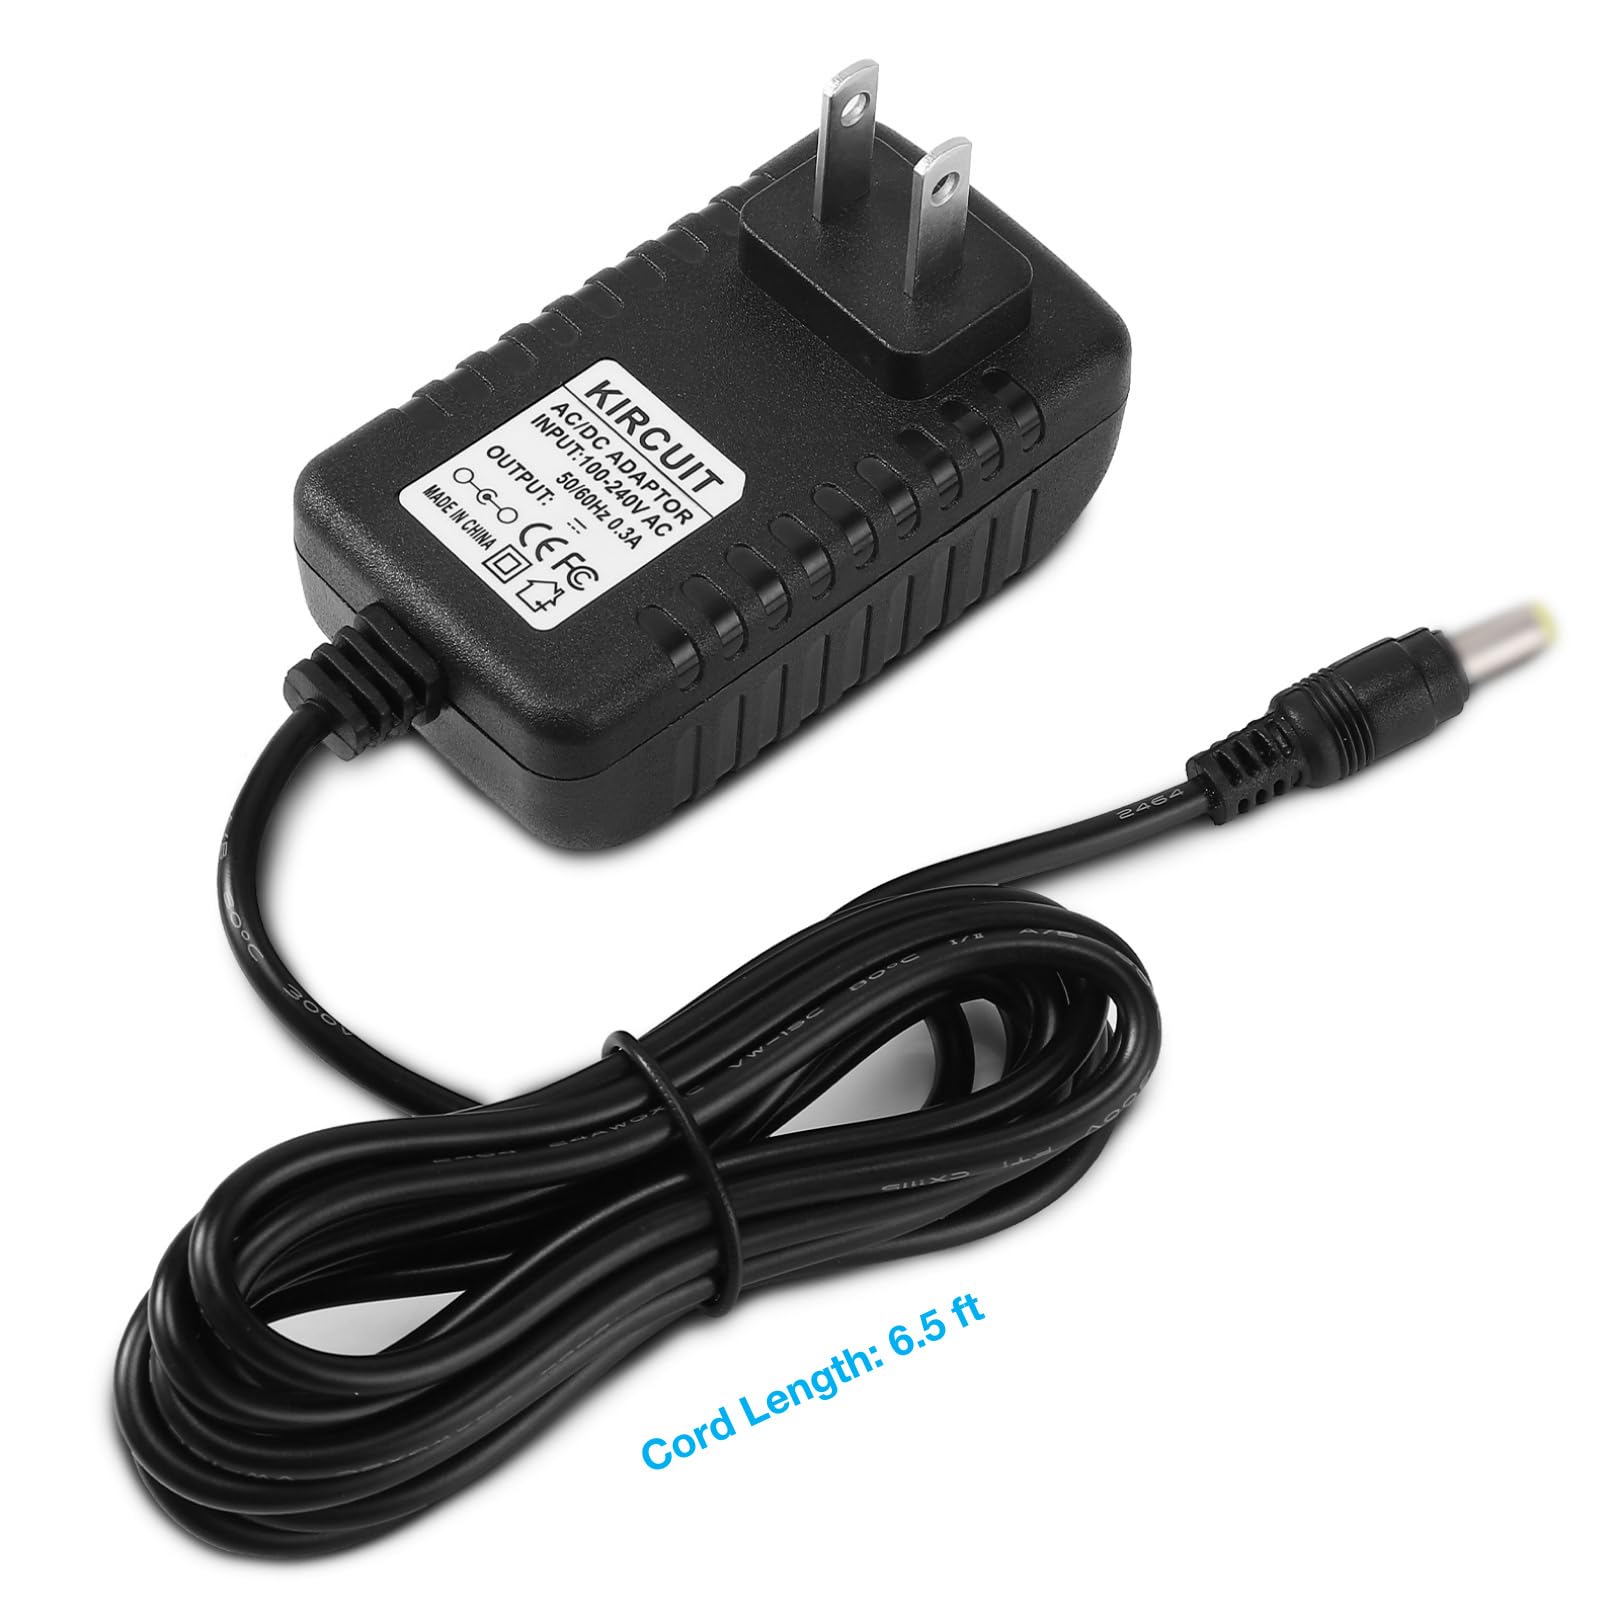 Kircuit Wall AC Power Adapter Compatible with Radio Shack PRO-39 PRO 60 PRO 29 Cat. No. 20-509 270-1560 270-1560A 20-188 200-0188 PRO-74 Cat. No. 20-513 PRO-43 Cat. No. 20-300 PRO-62 PRO-70